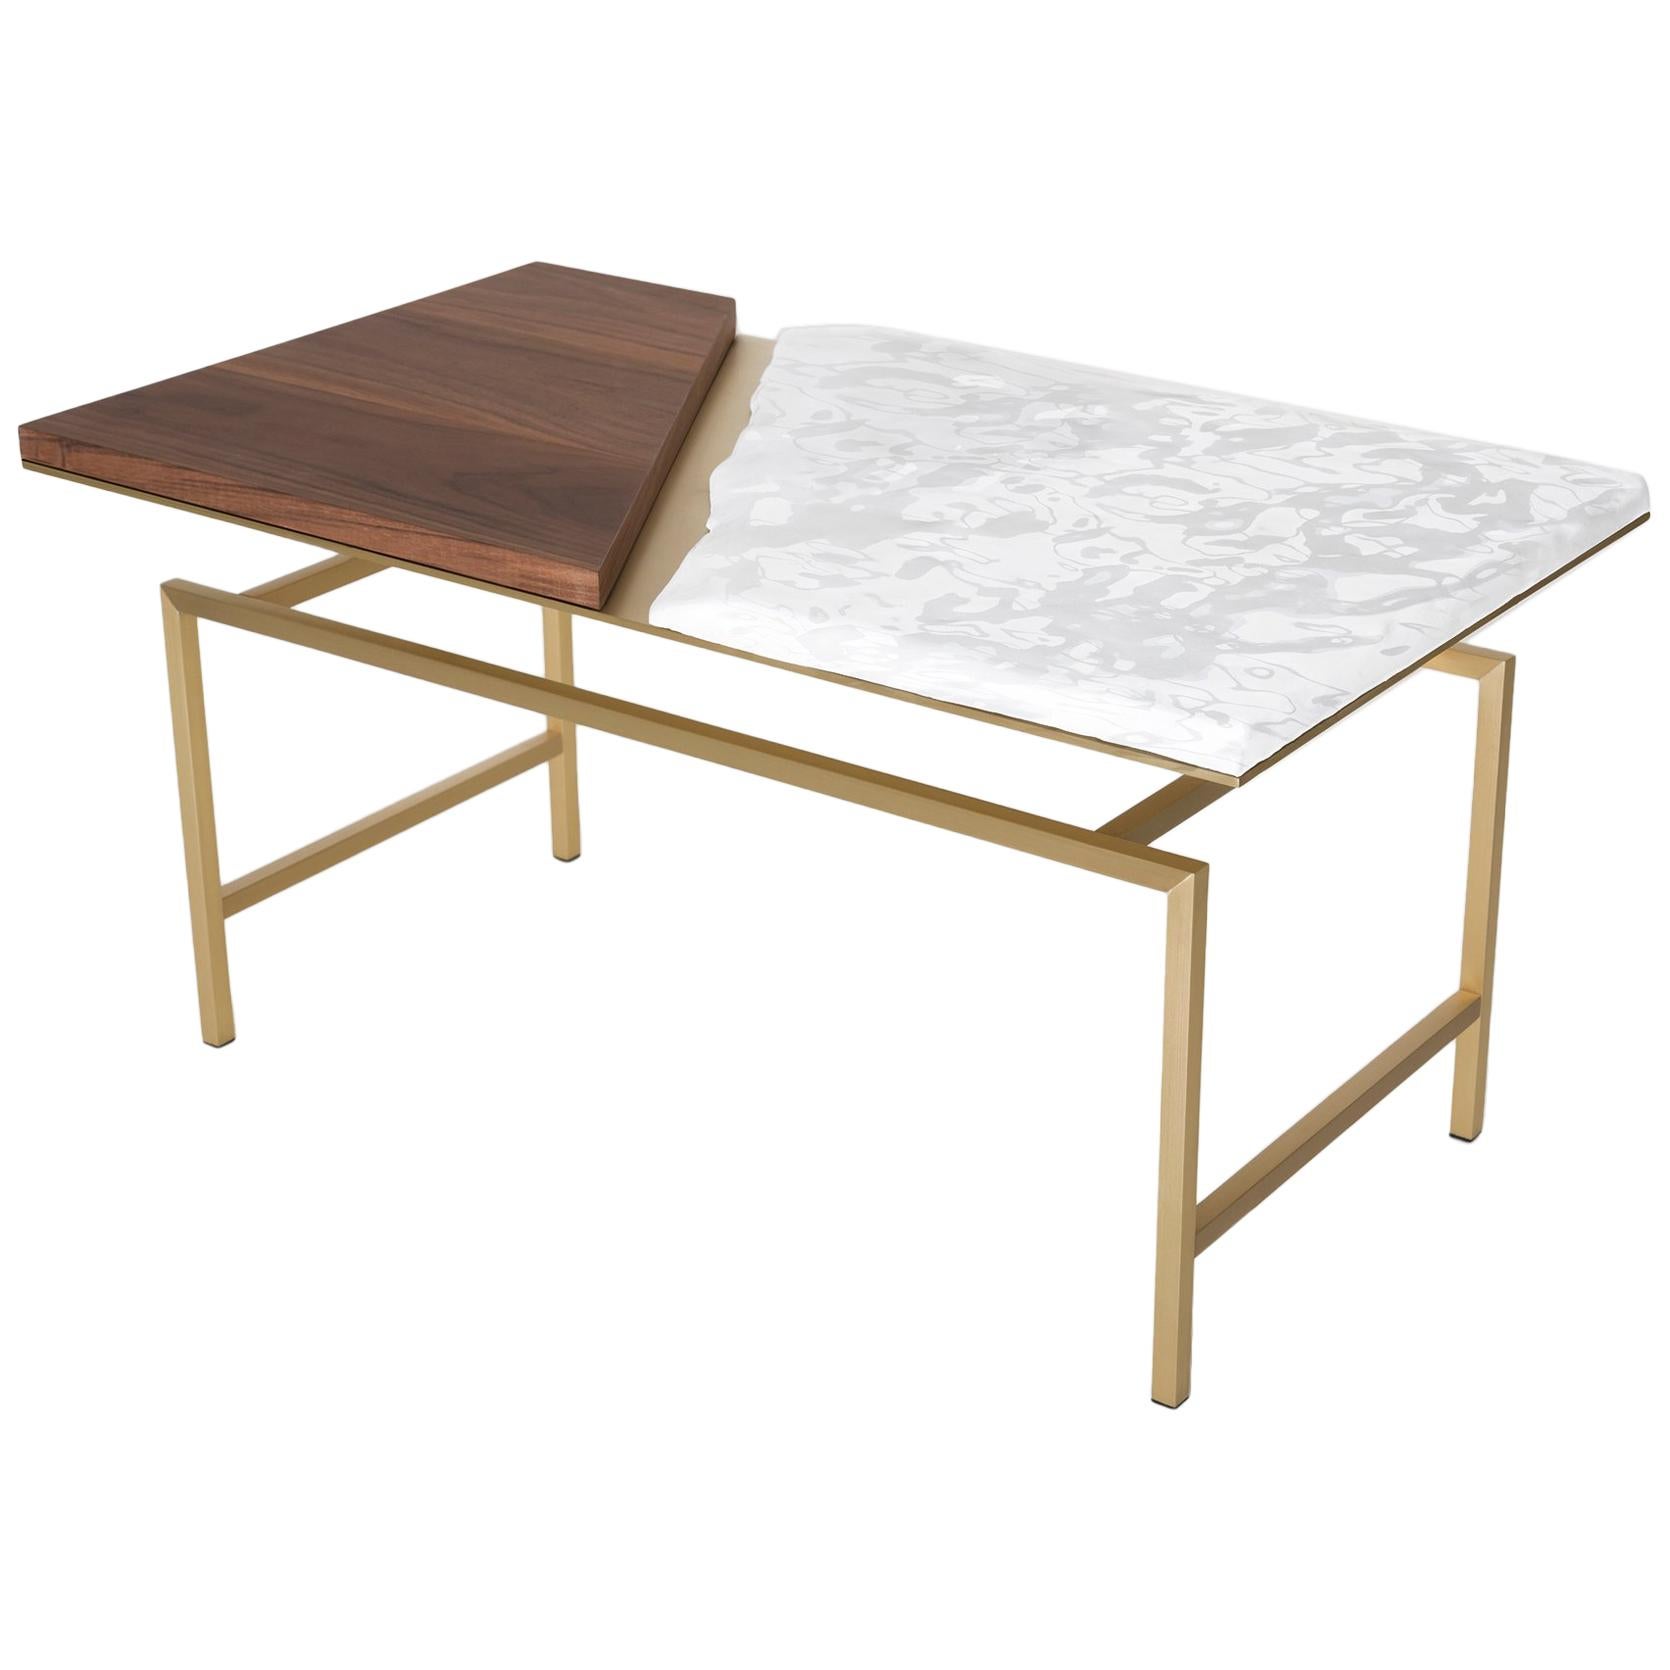 Snaer, Brass, Porcelain and Solid Canaletto Walnut Contemporary Coffee Table For Sale